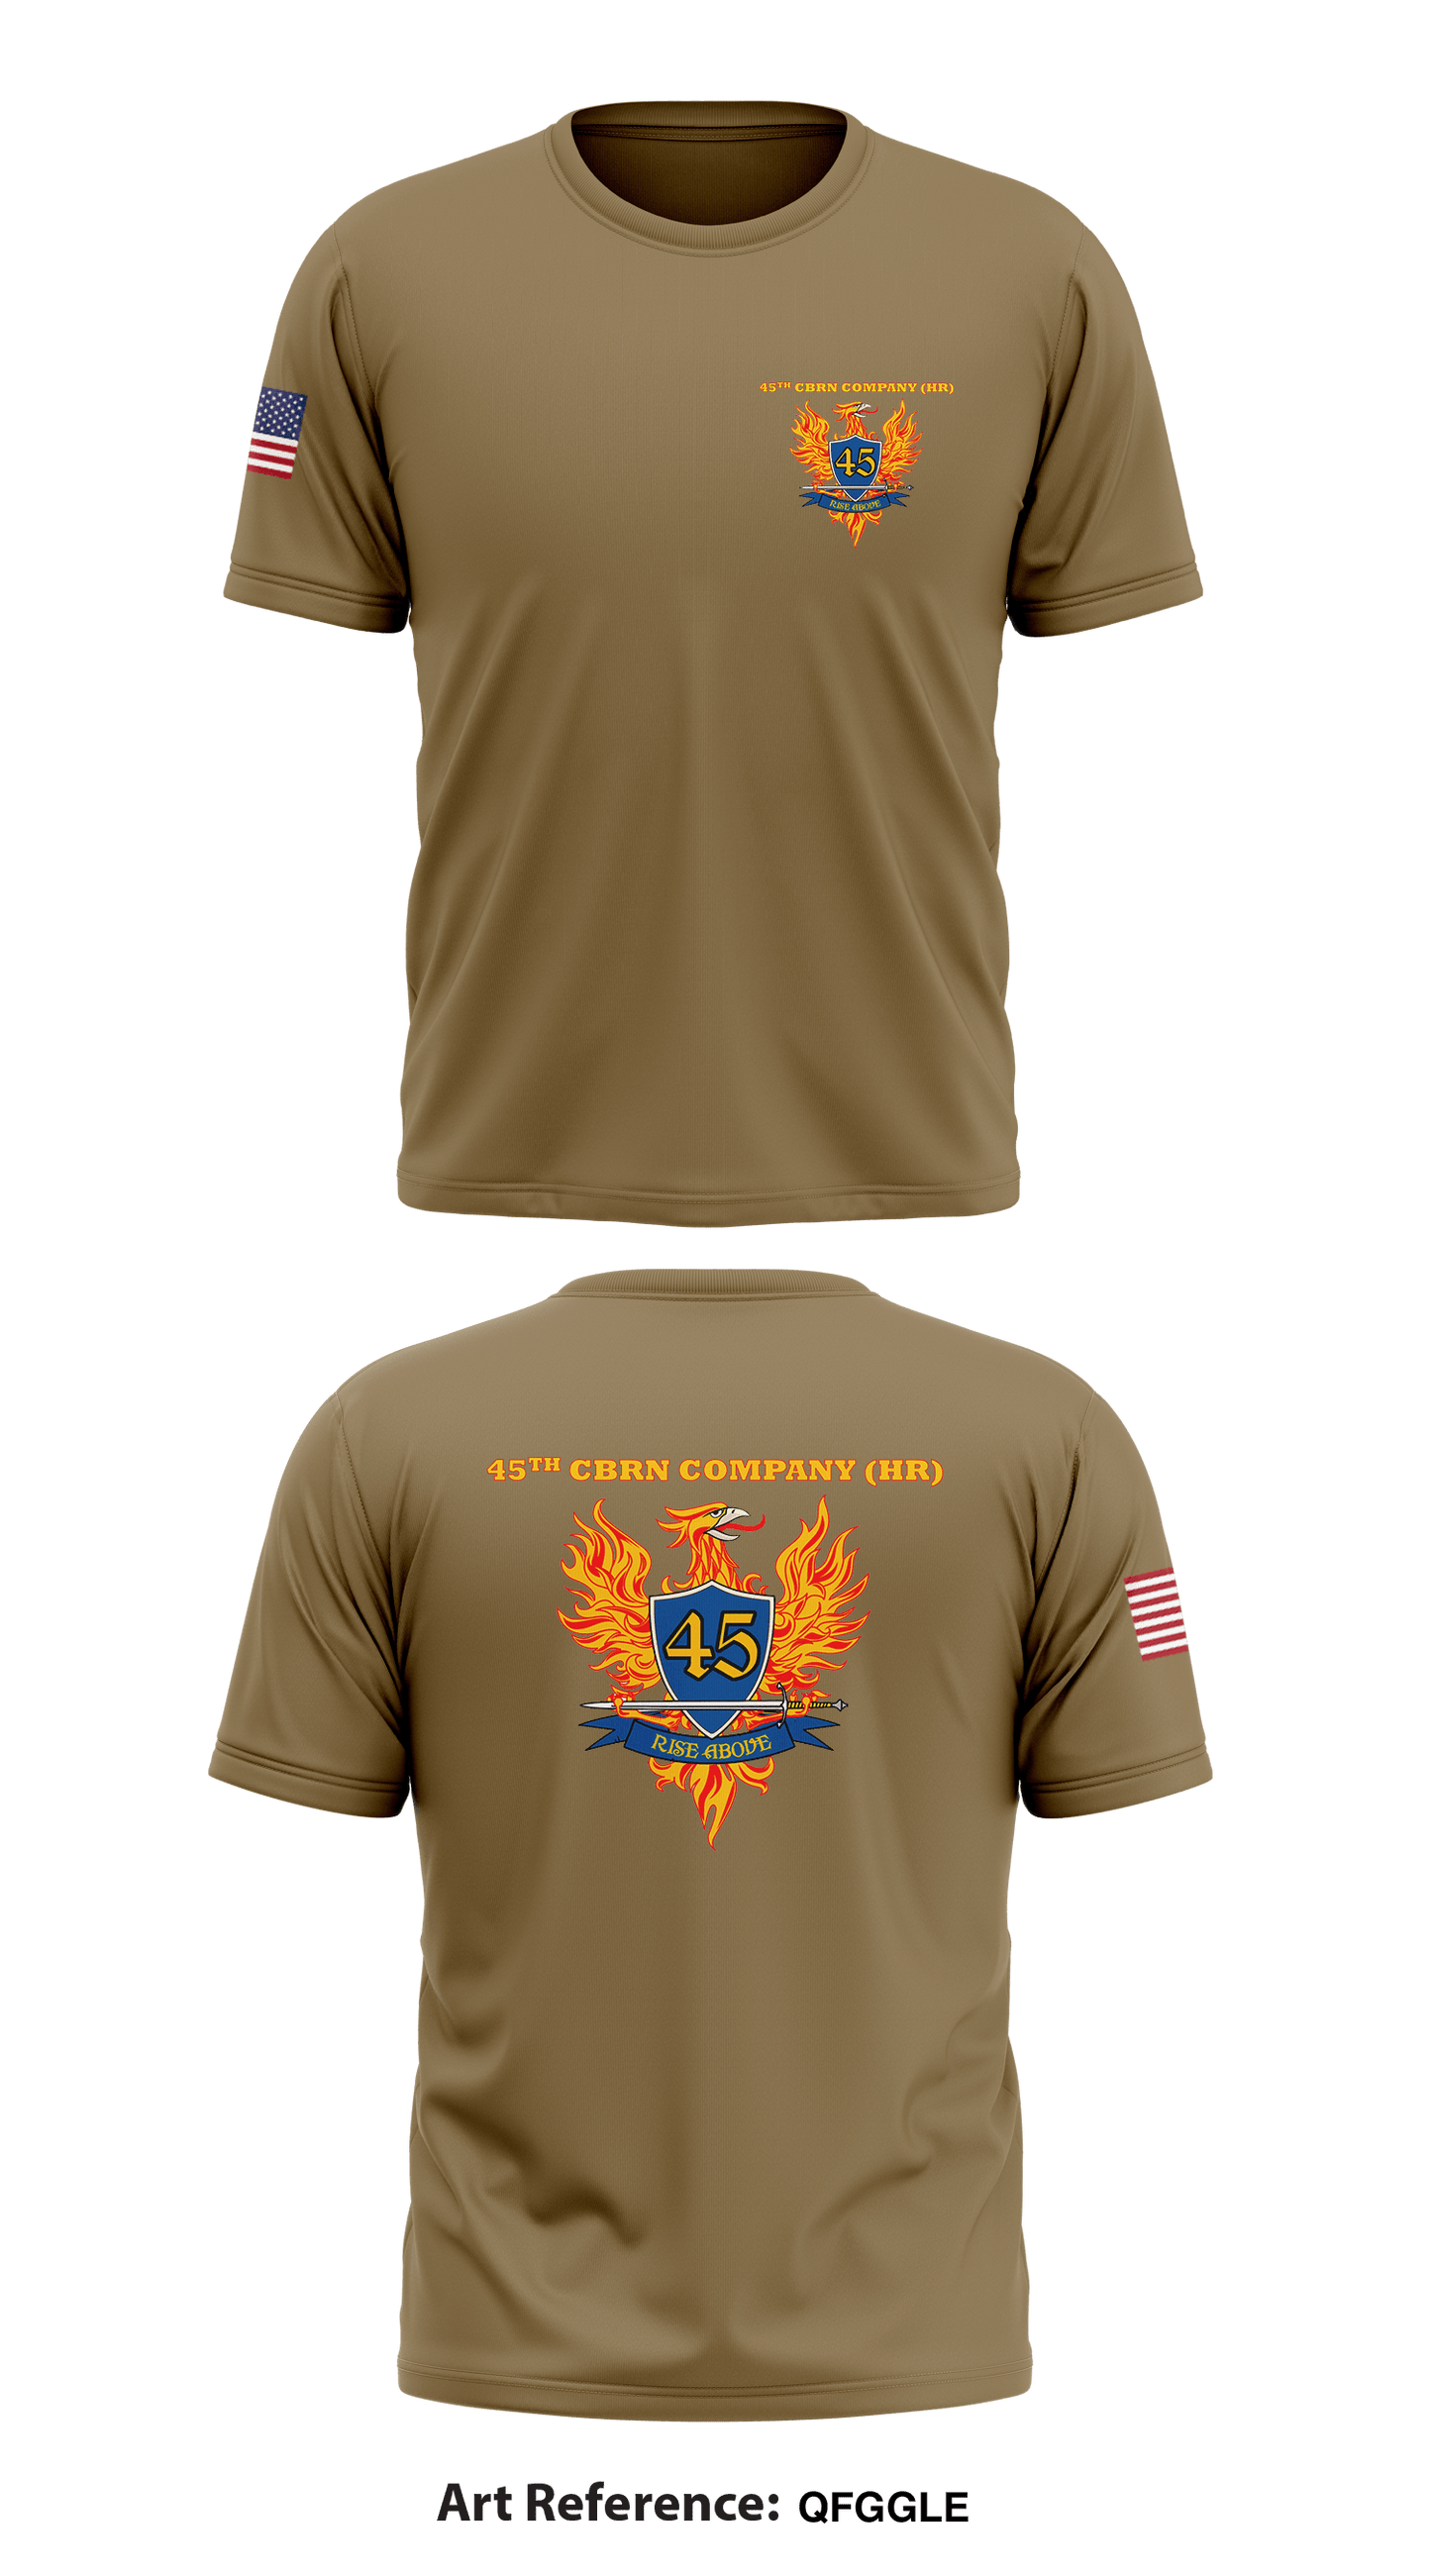 45TH CBRN CO (HR) Store 1 Core Men's SS Performance Tee - qFGgLE